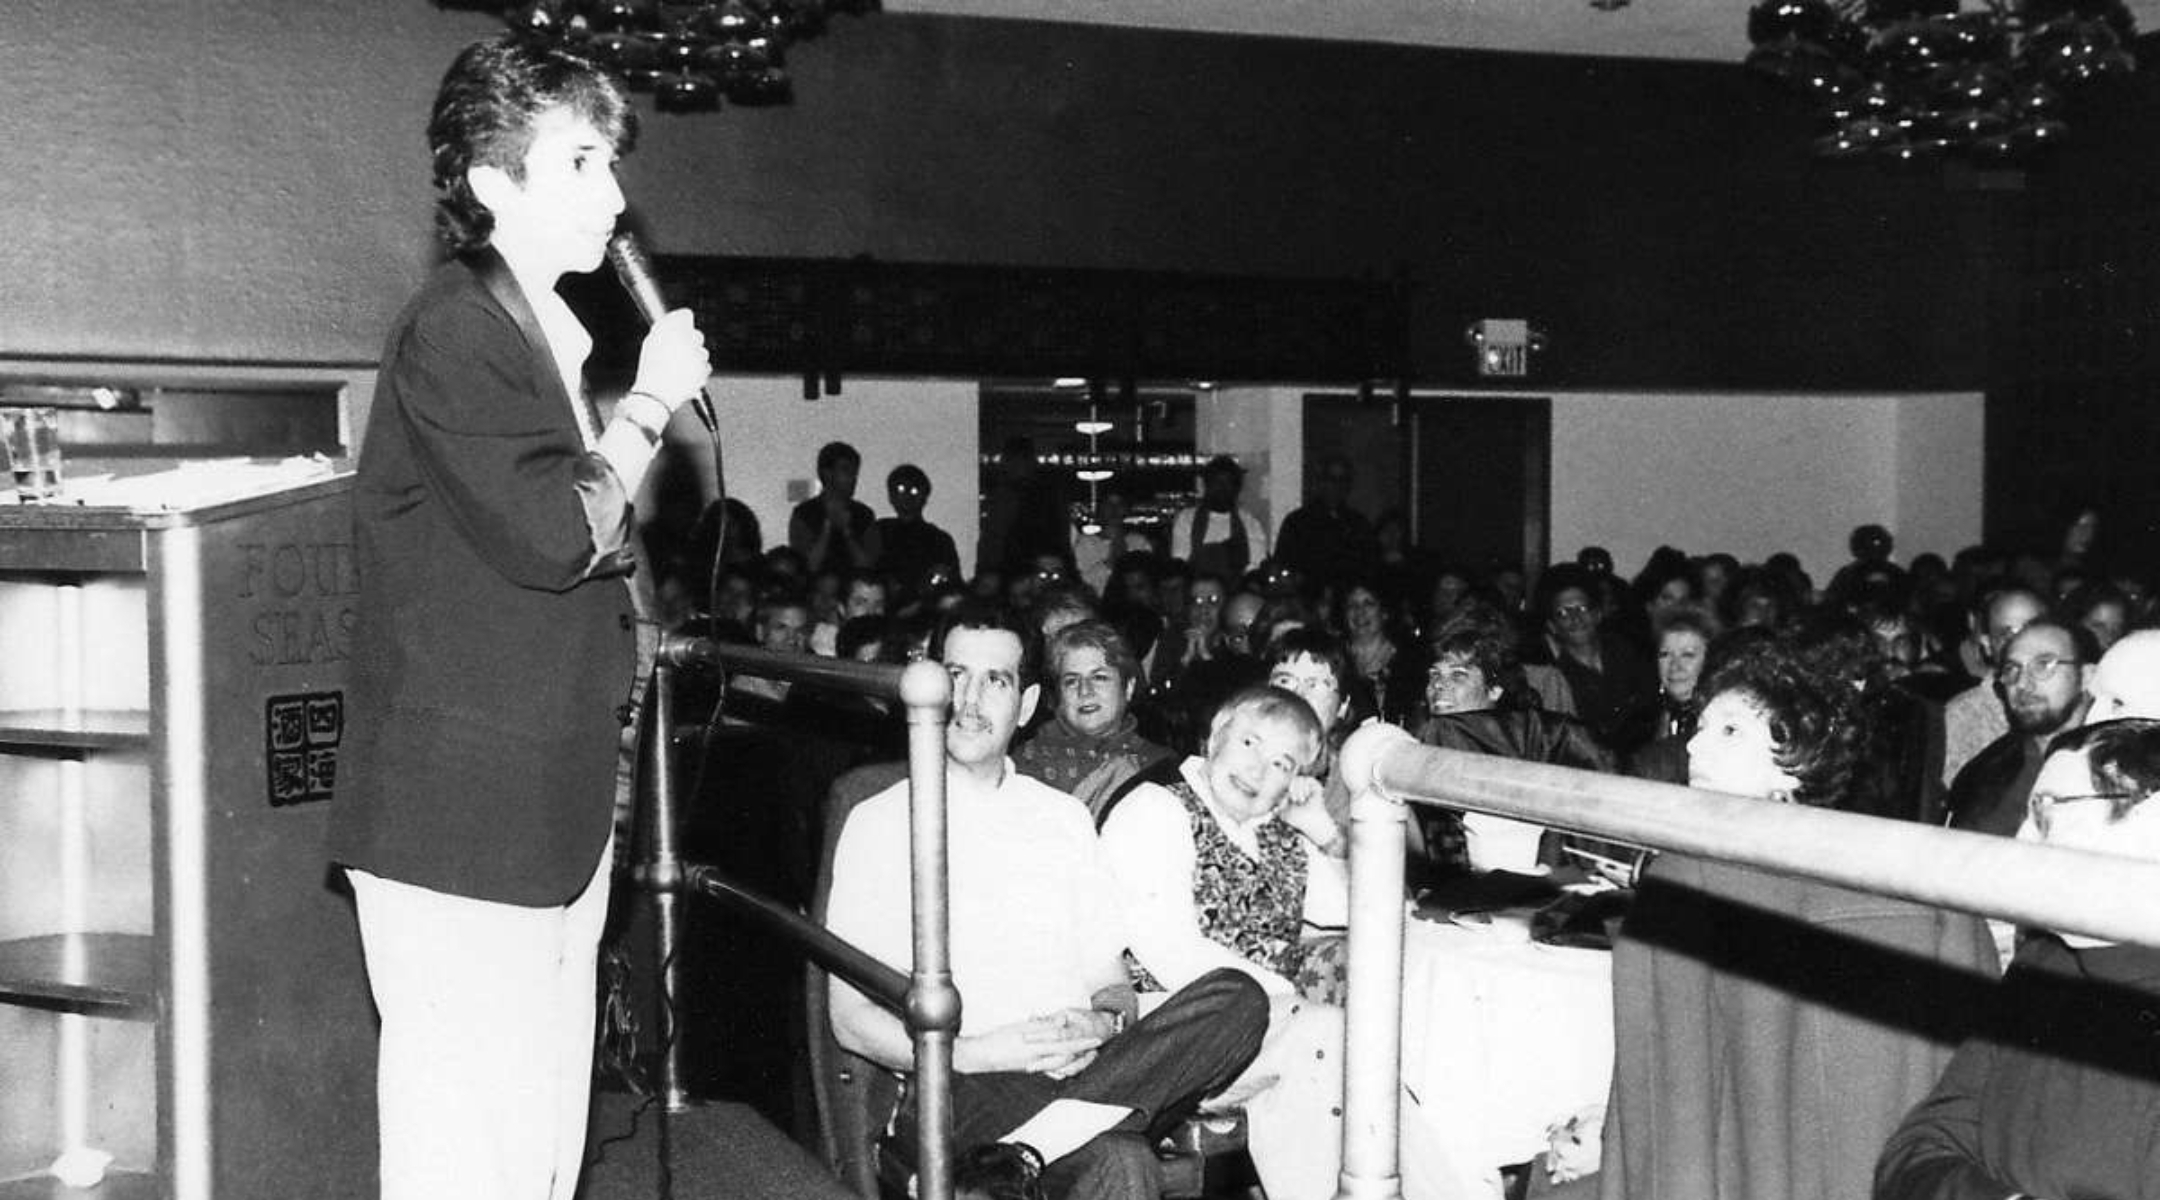 Lisa Geduldig shown onstage at the first annual Kung Pao Kosher Comedy show in San Francisco in 1993. (Courtesy of Lisa Geduldig)